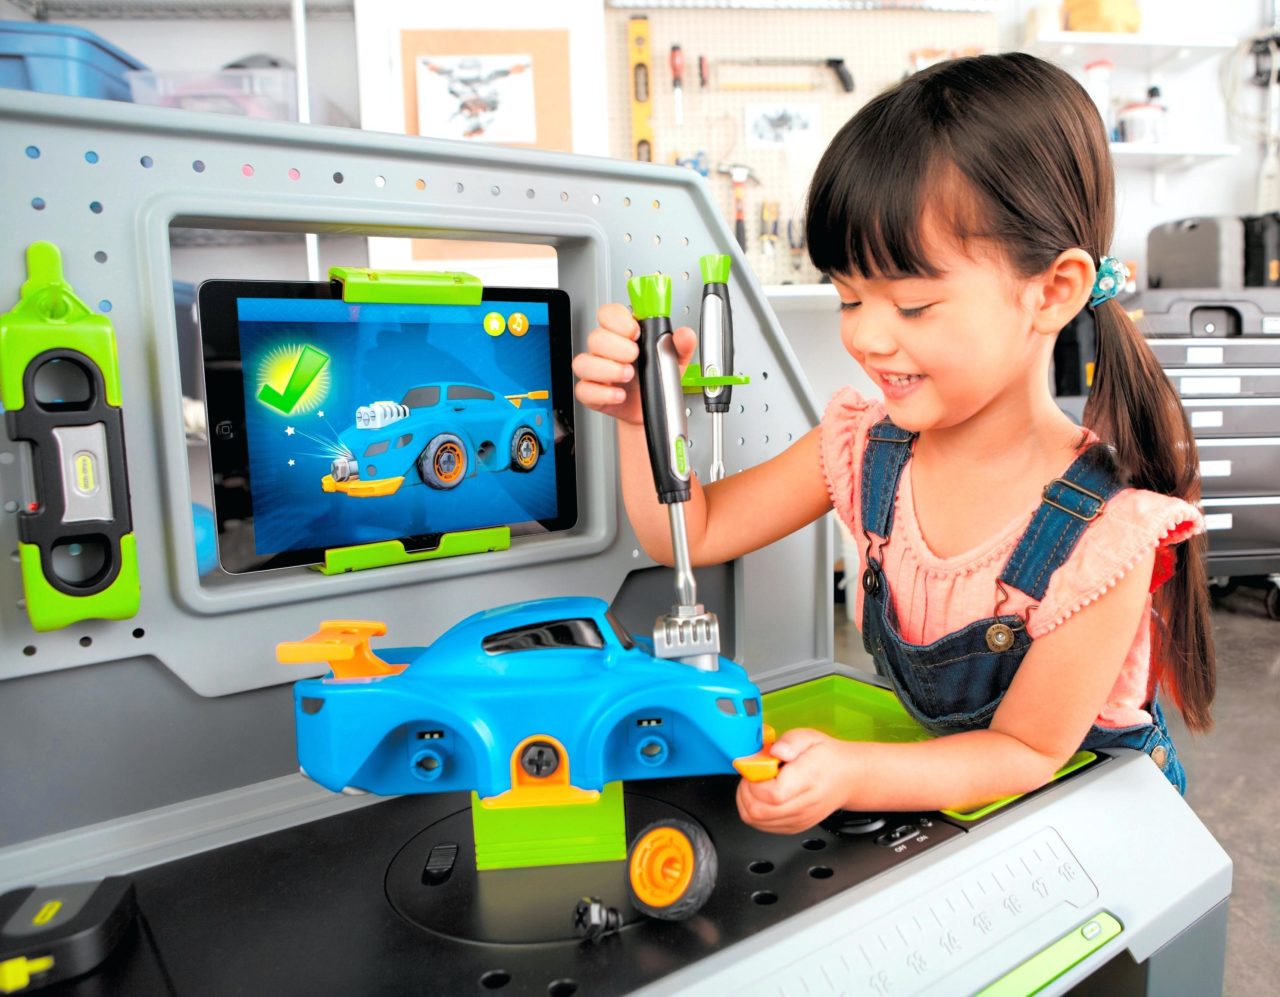 little-tikes-workbench-recall-construct-n-learn-smart-vehicle-set-toys-workbenches-replacement-parts-1280x997.jpg